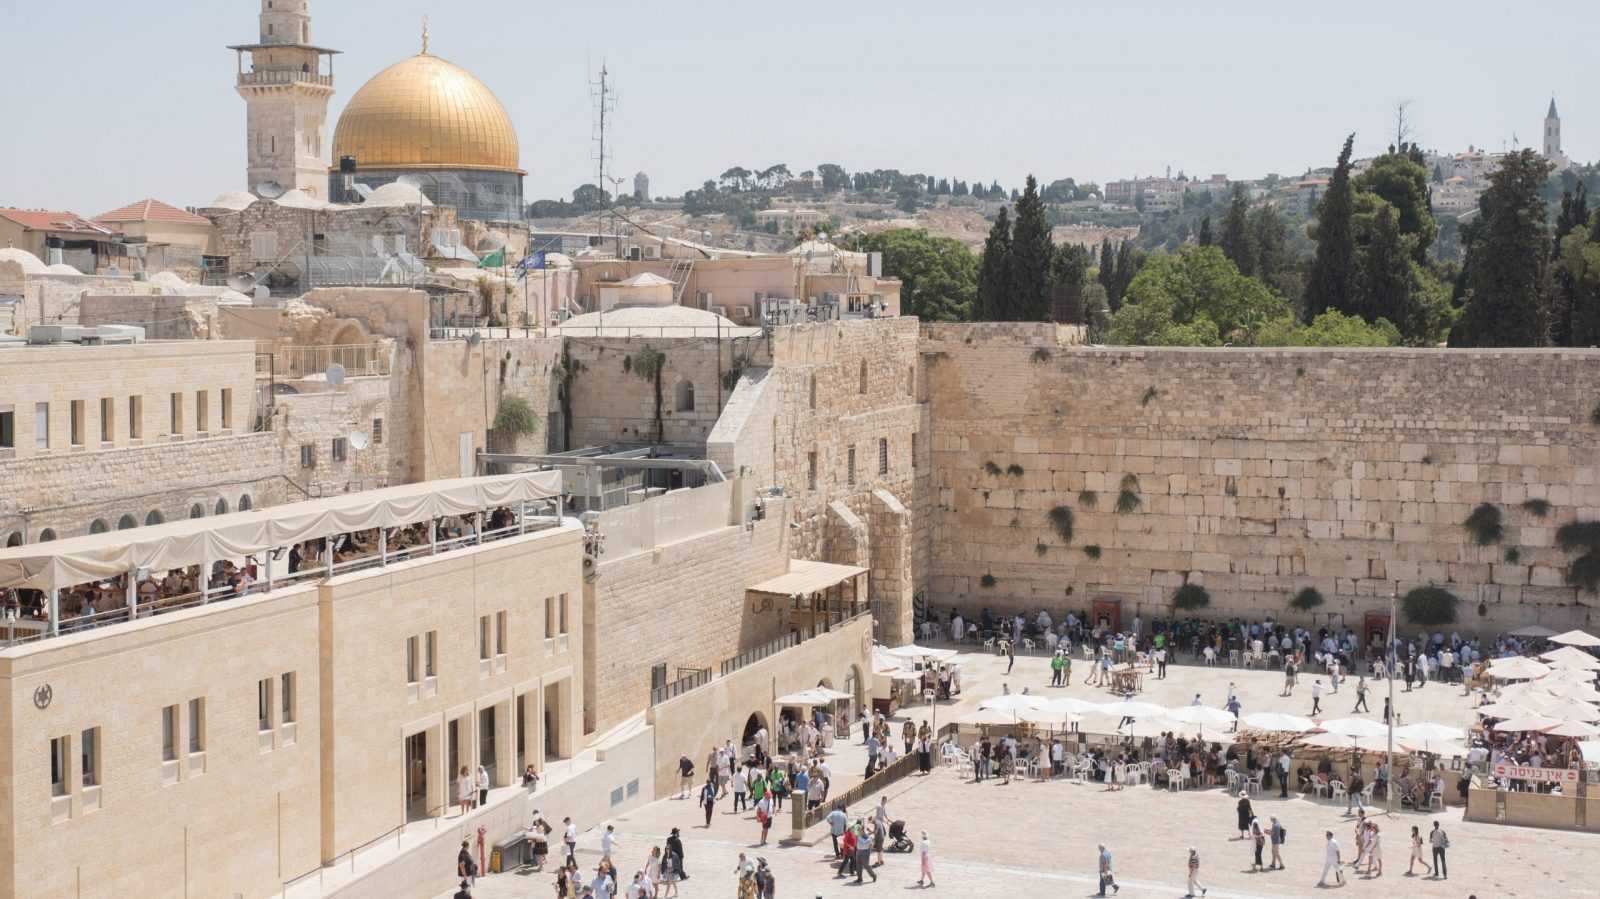 Must-See Attractions in Israel The Western Wall